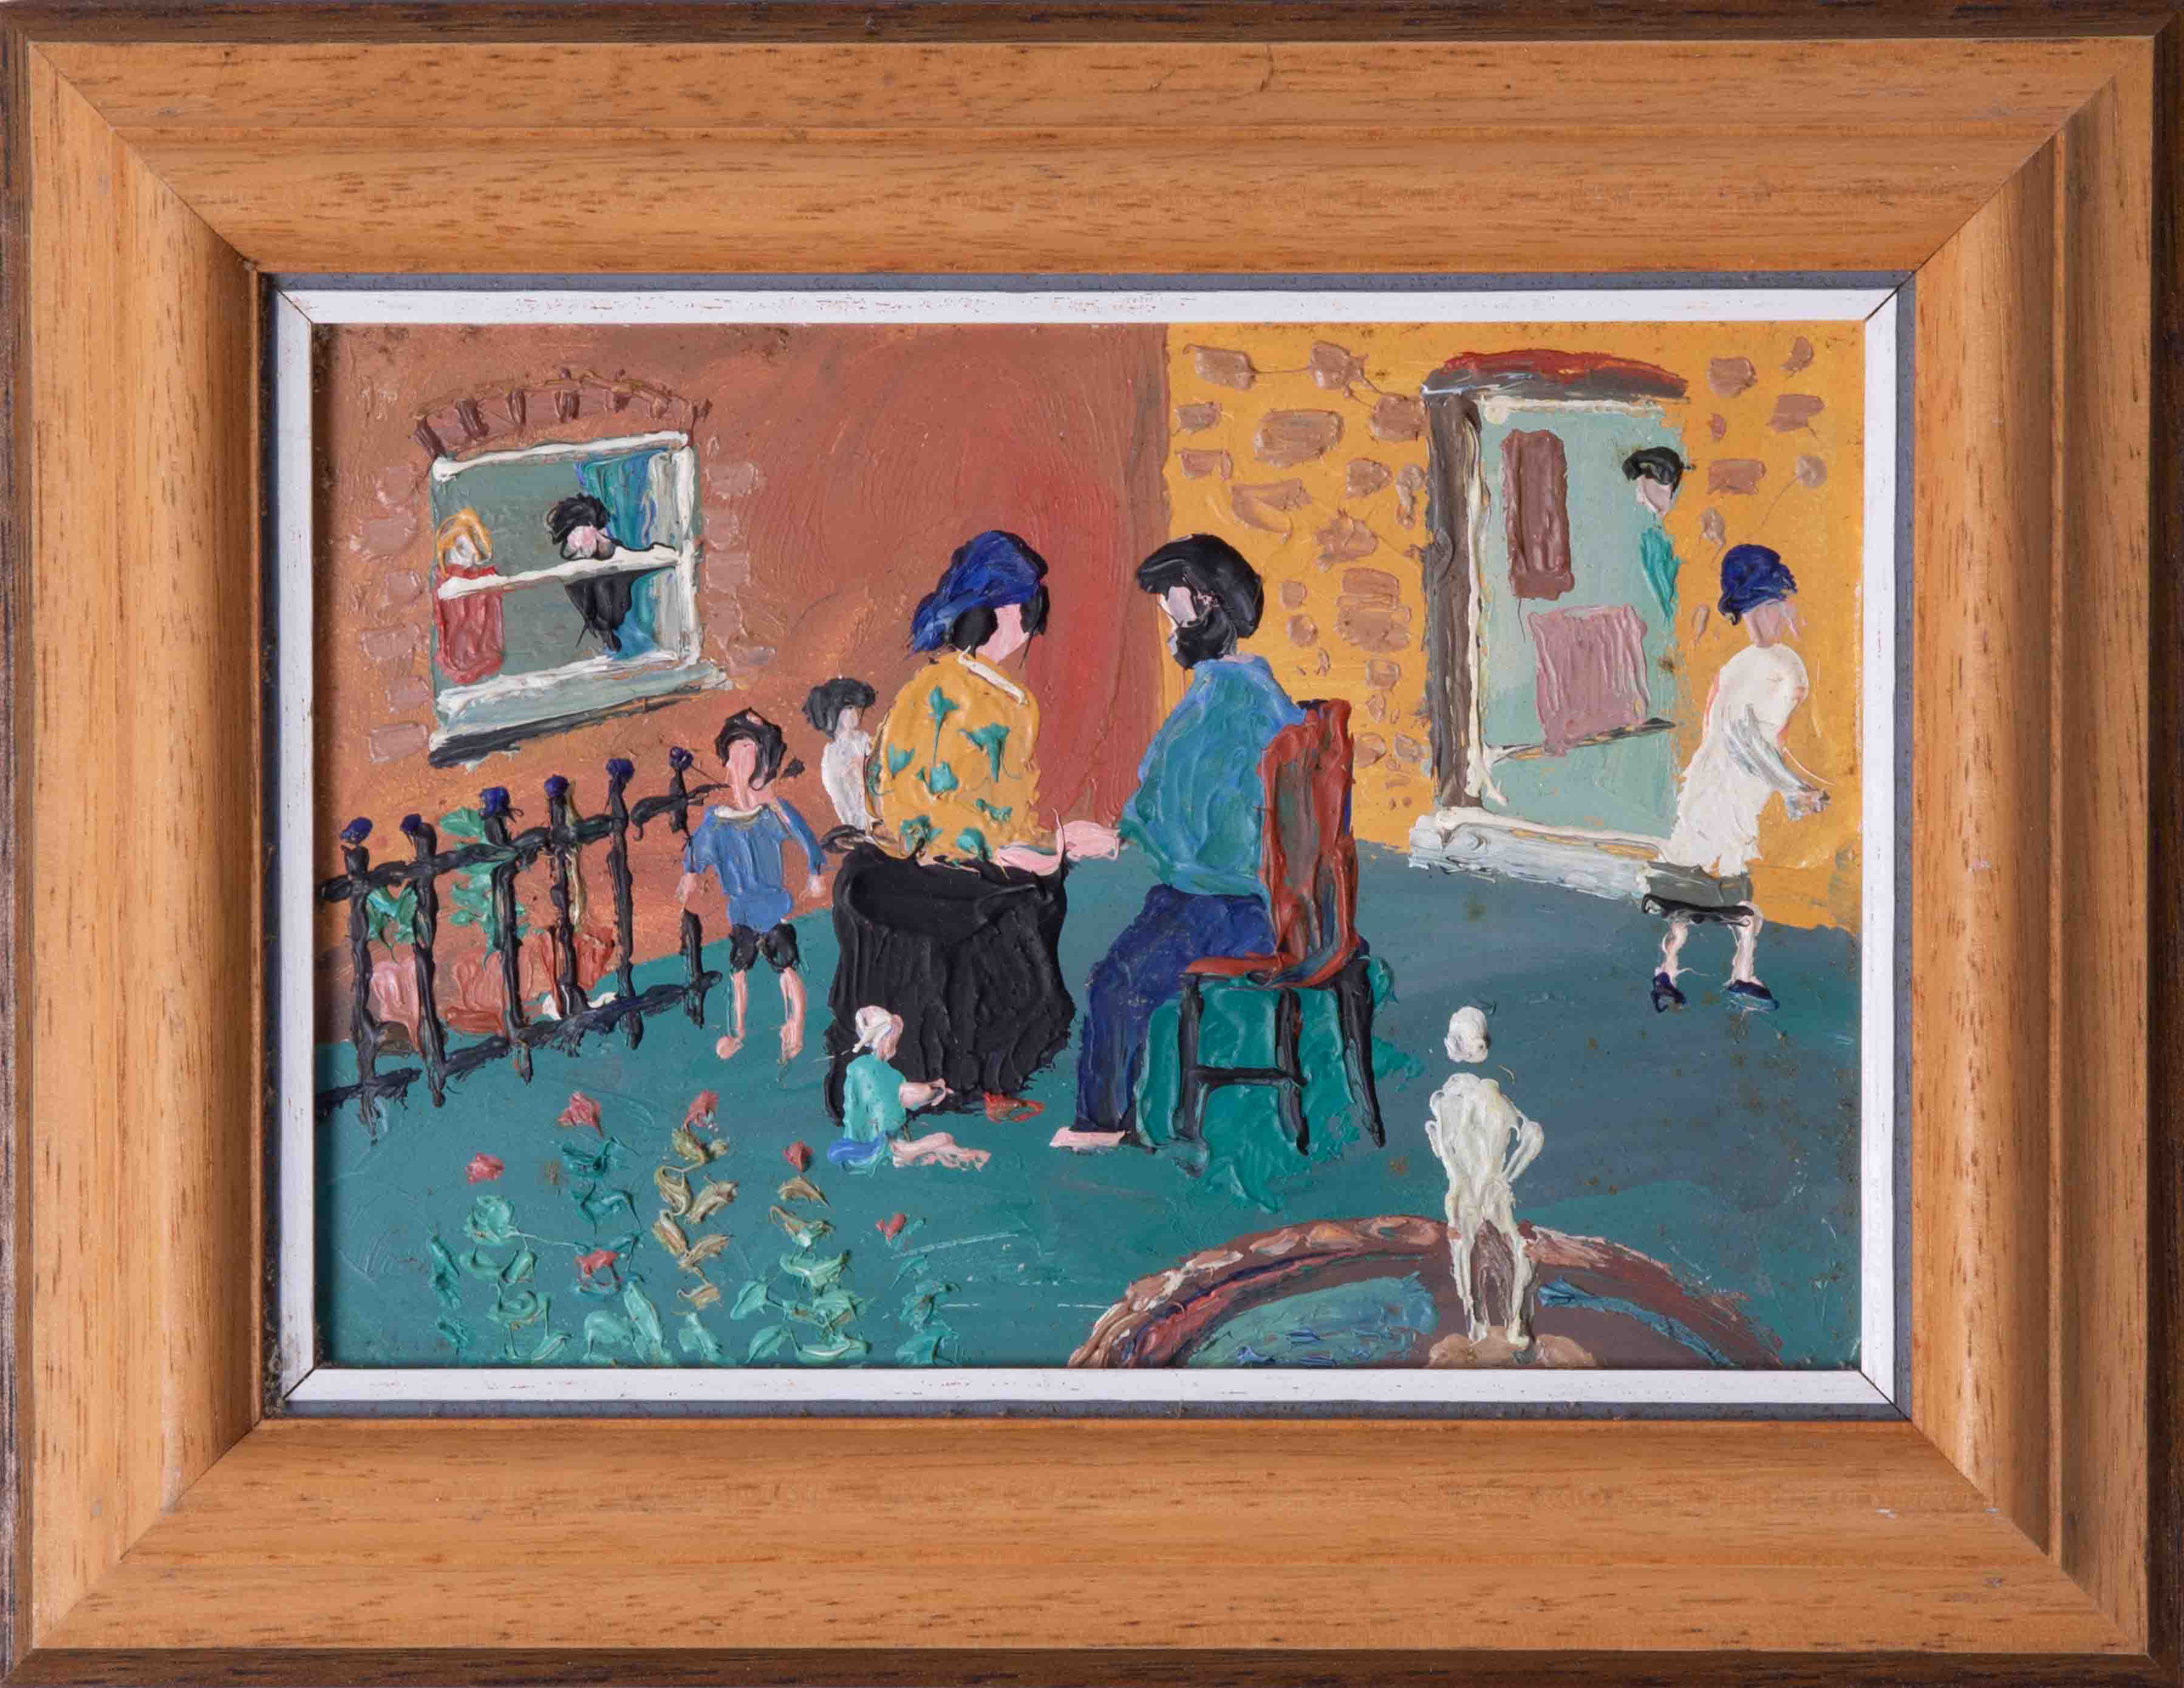 Fred Yates (1922-2008) 'Figures in a Courtyard' oil on board, 11cm x 16cm, framed. The bearded